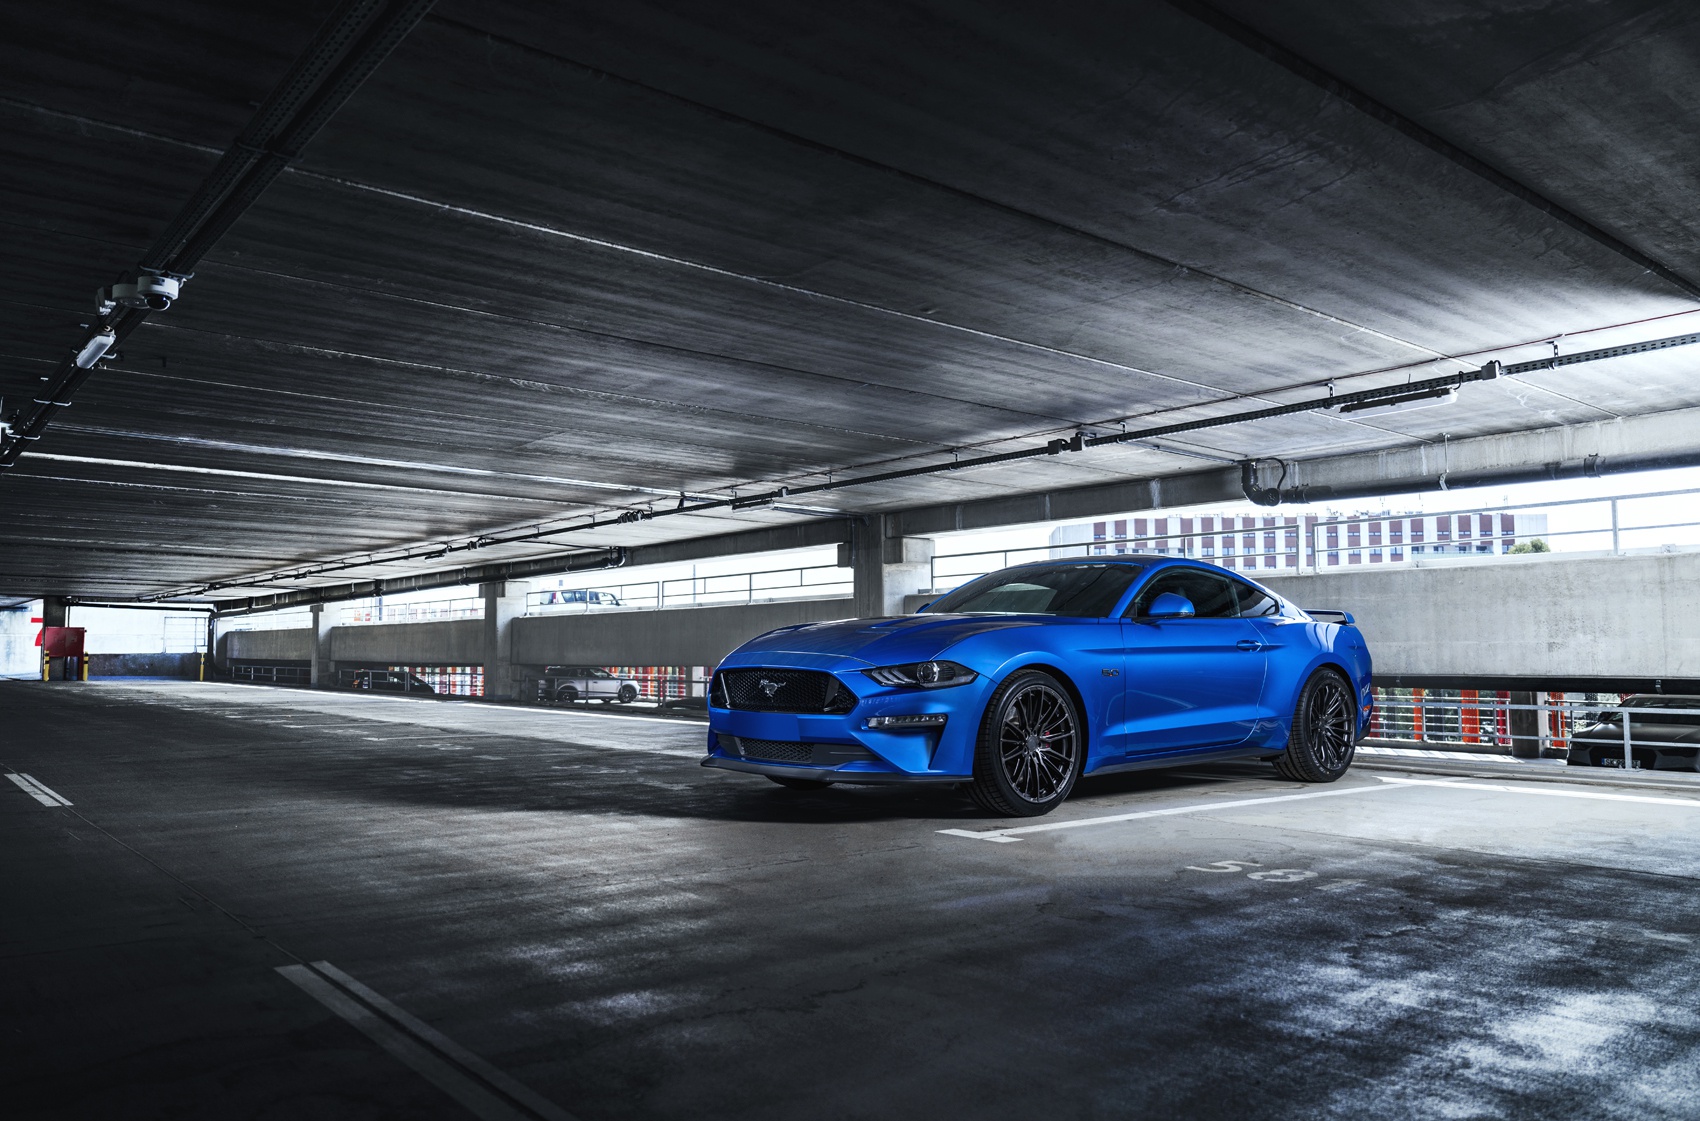 Ford Mustang Concaver CVR7 Carbon Graphite